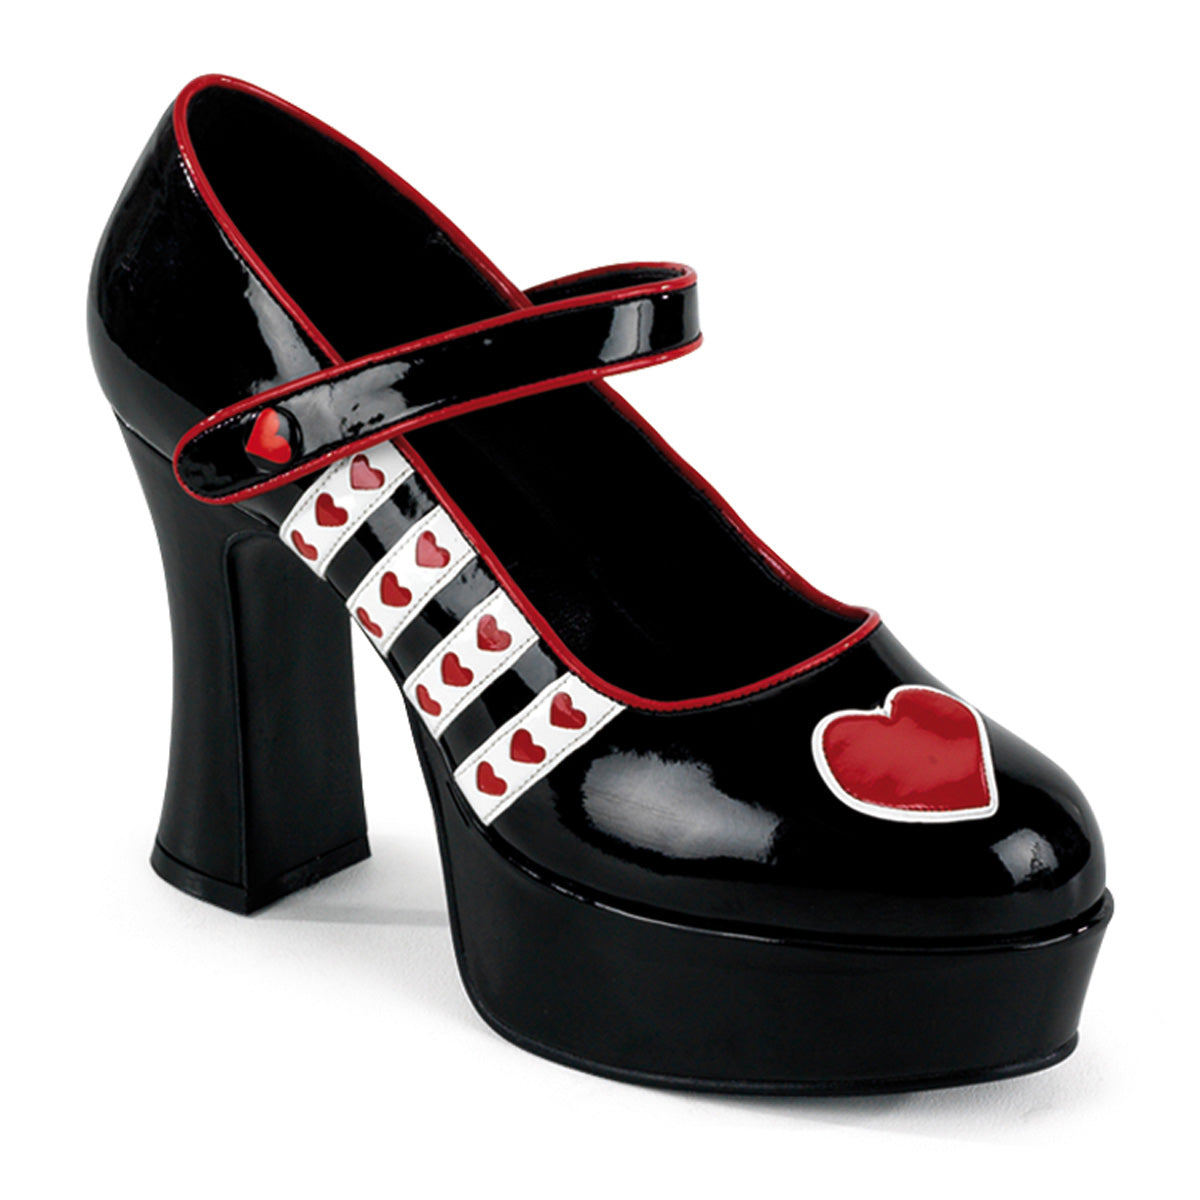 QUEEN-55 Black-White-Red Patent